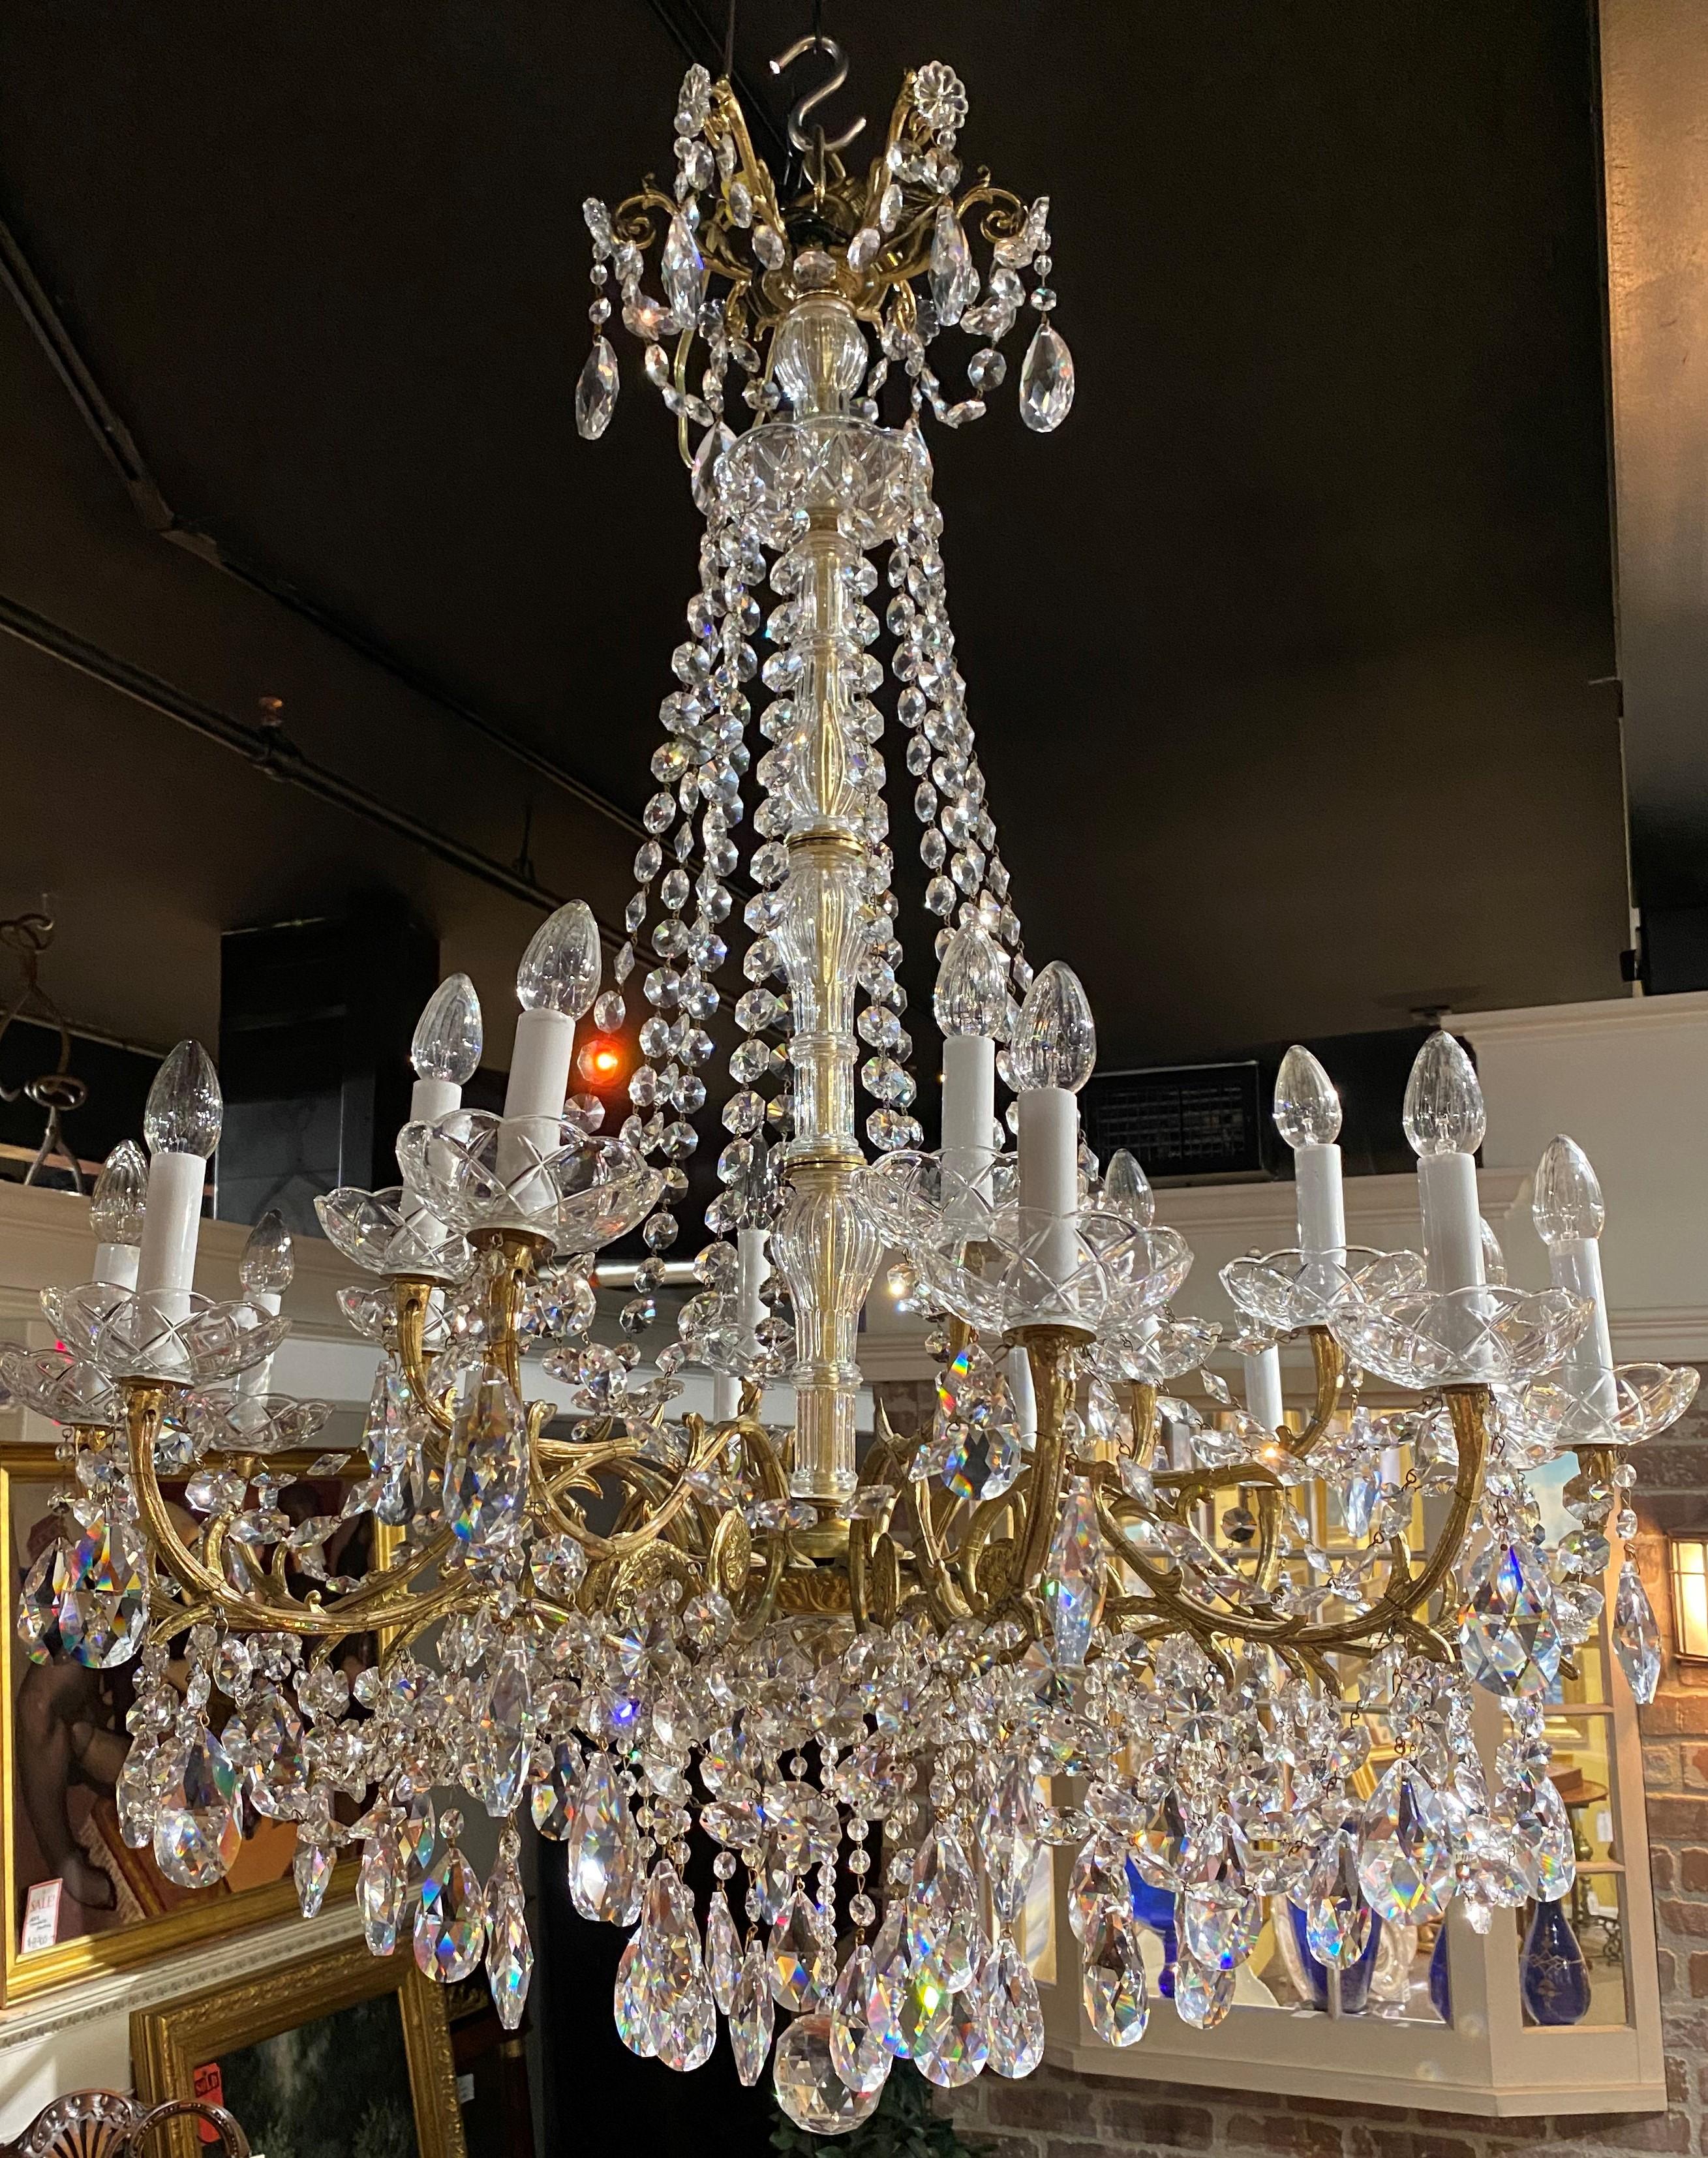 French Provincial Exquisite 18 Light French Style Crystal & Brass Chandelier